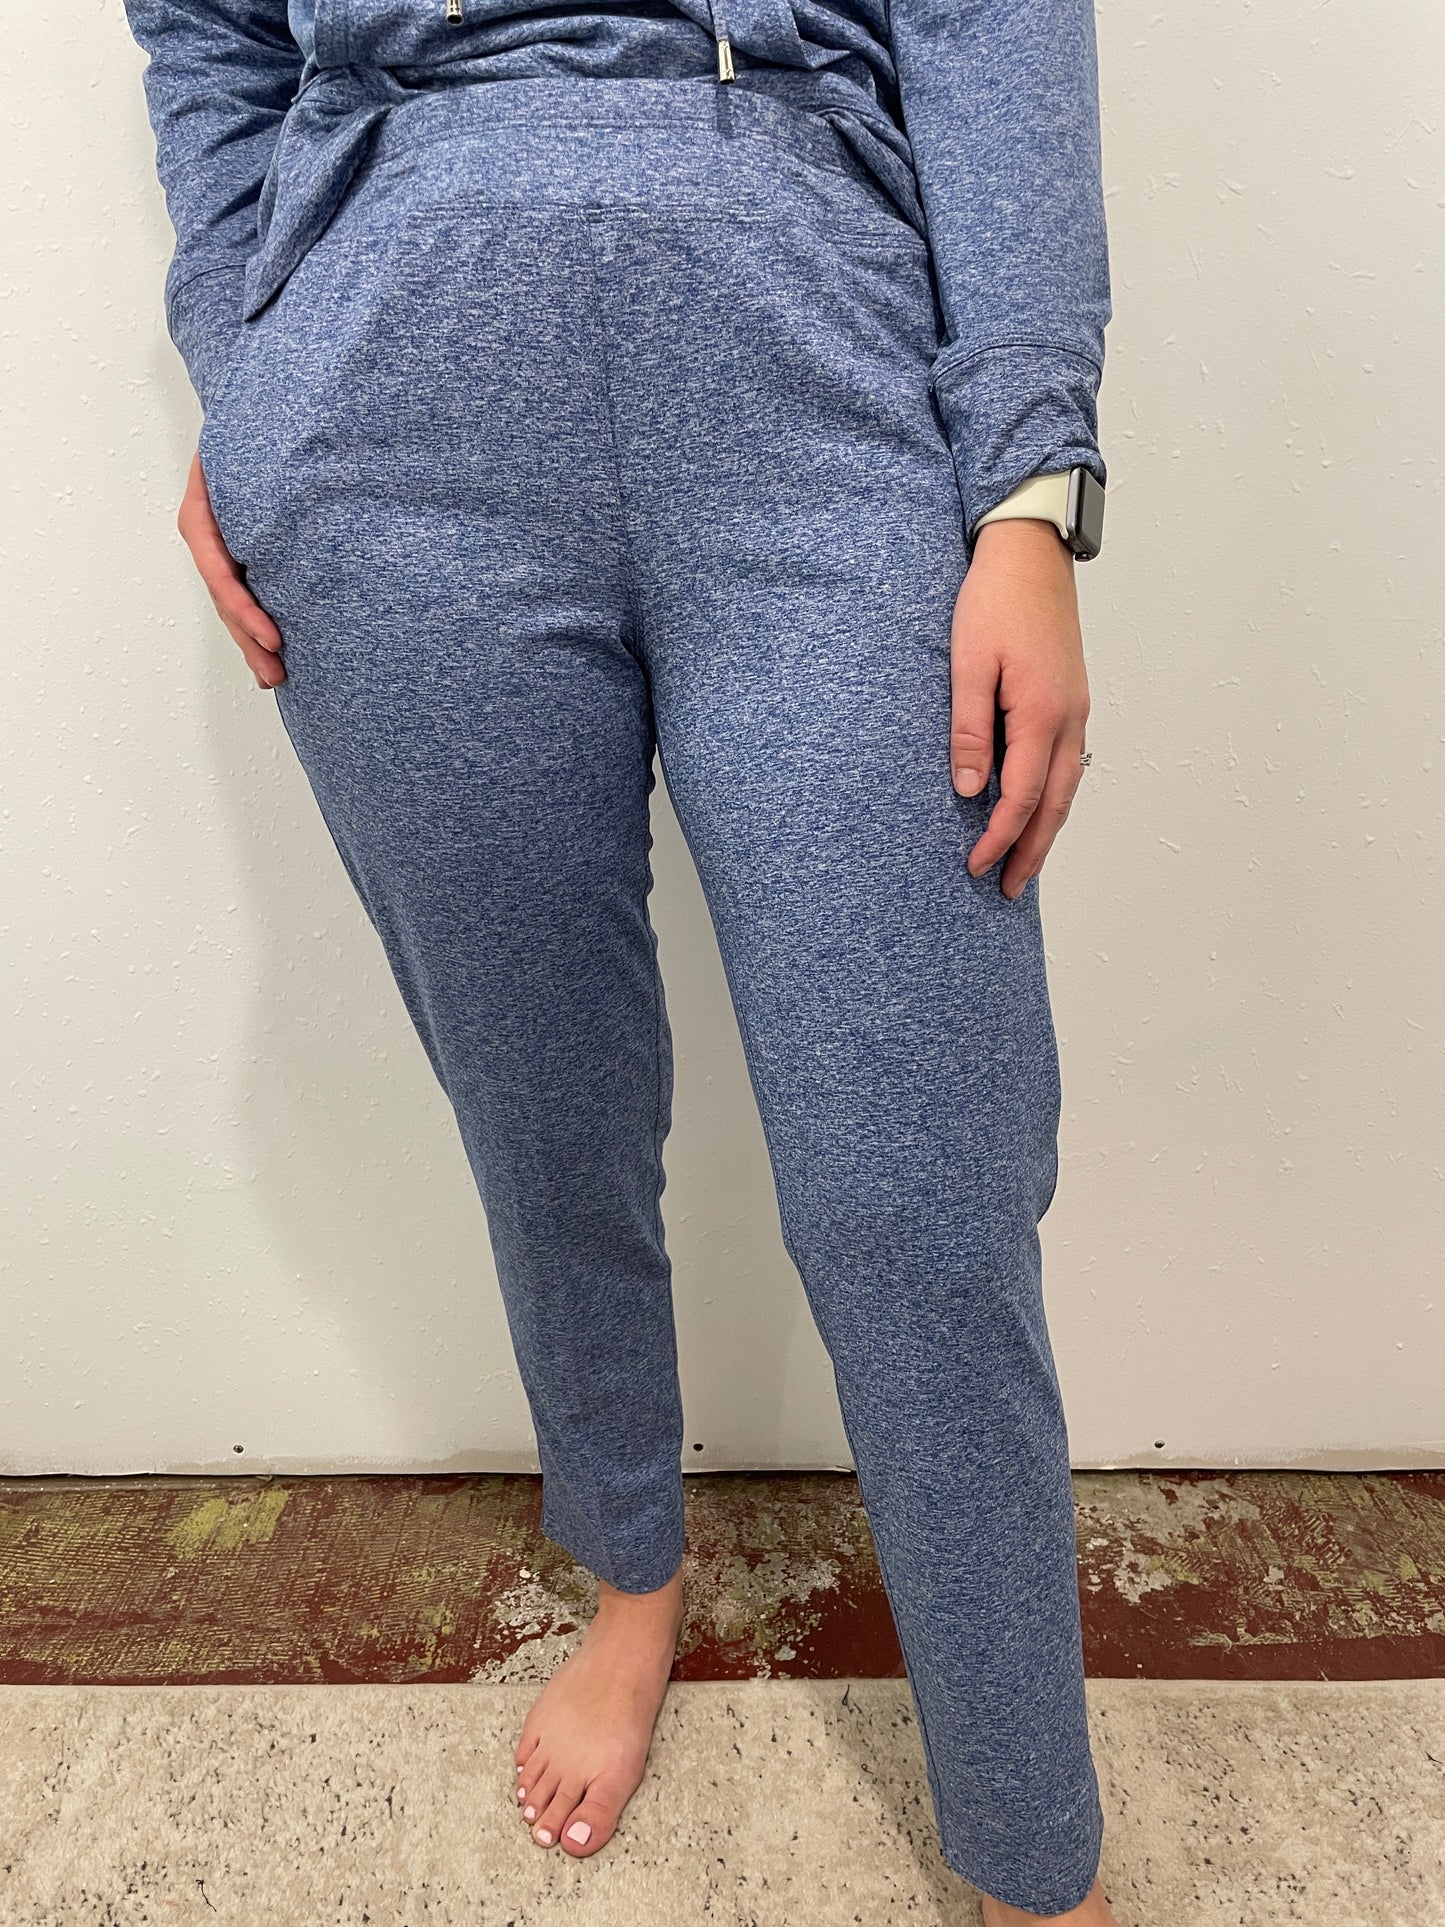 IN THE GROOVE MARL PRINT PANT - MIST BLUE